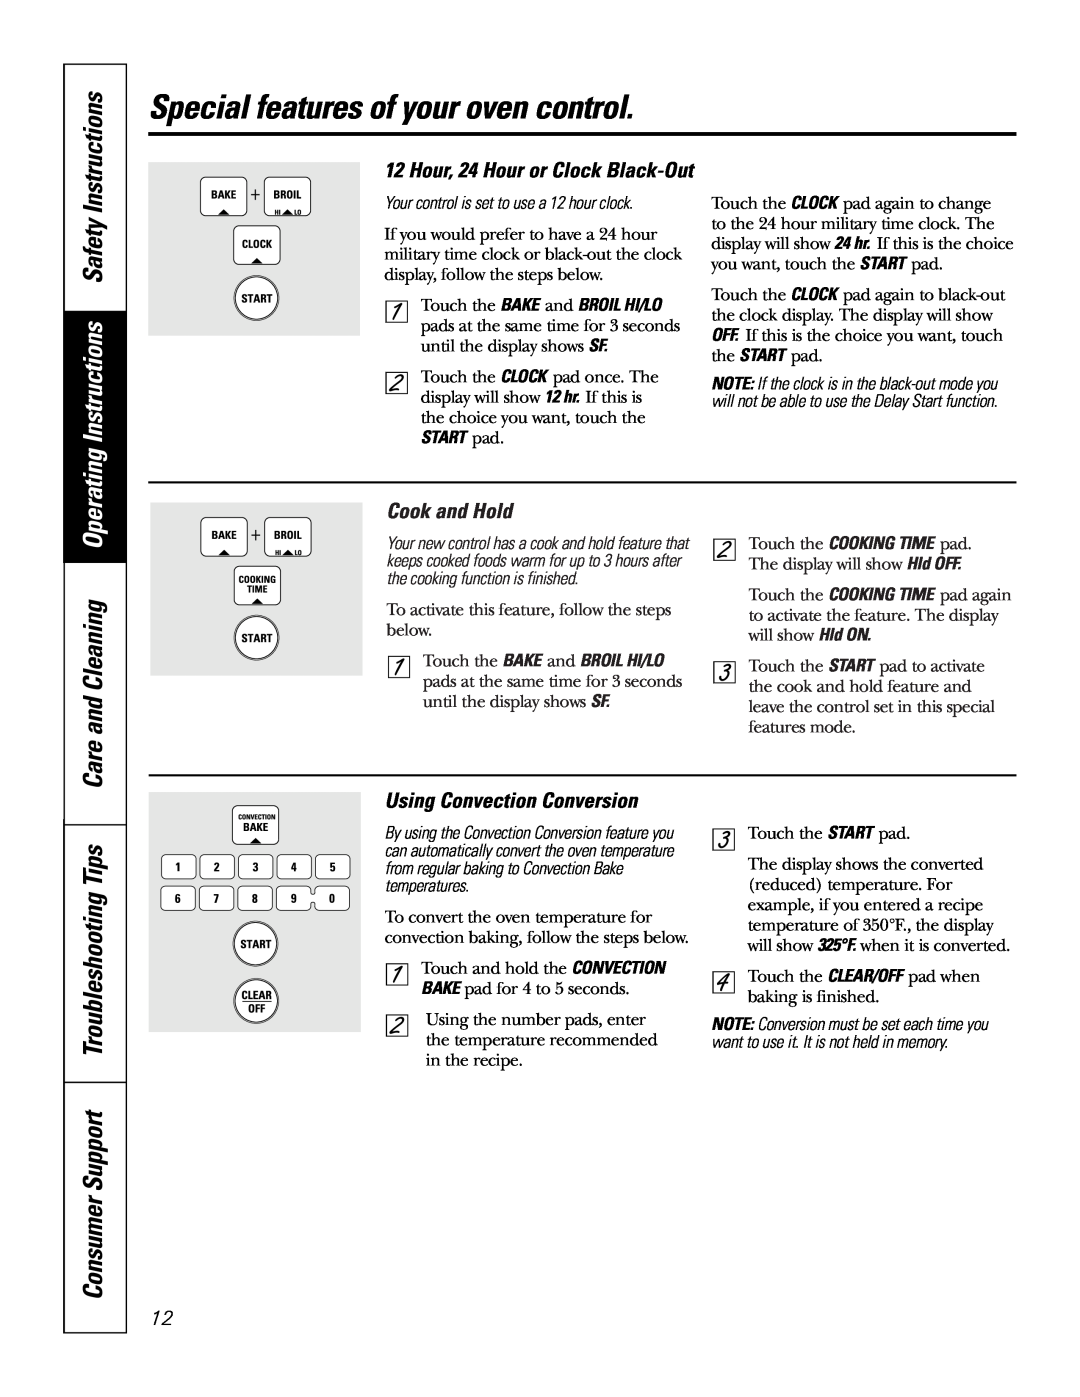 GE JB965 Operating Instructions Safety, Consumer Support Troubleshooting Tips, Cook and Hold, Using Convection Conversion 